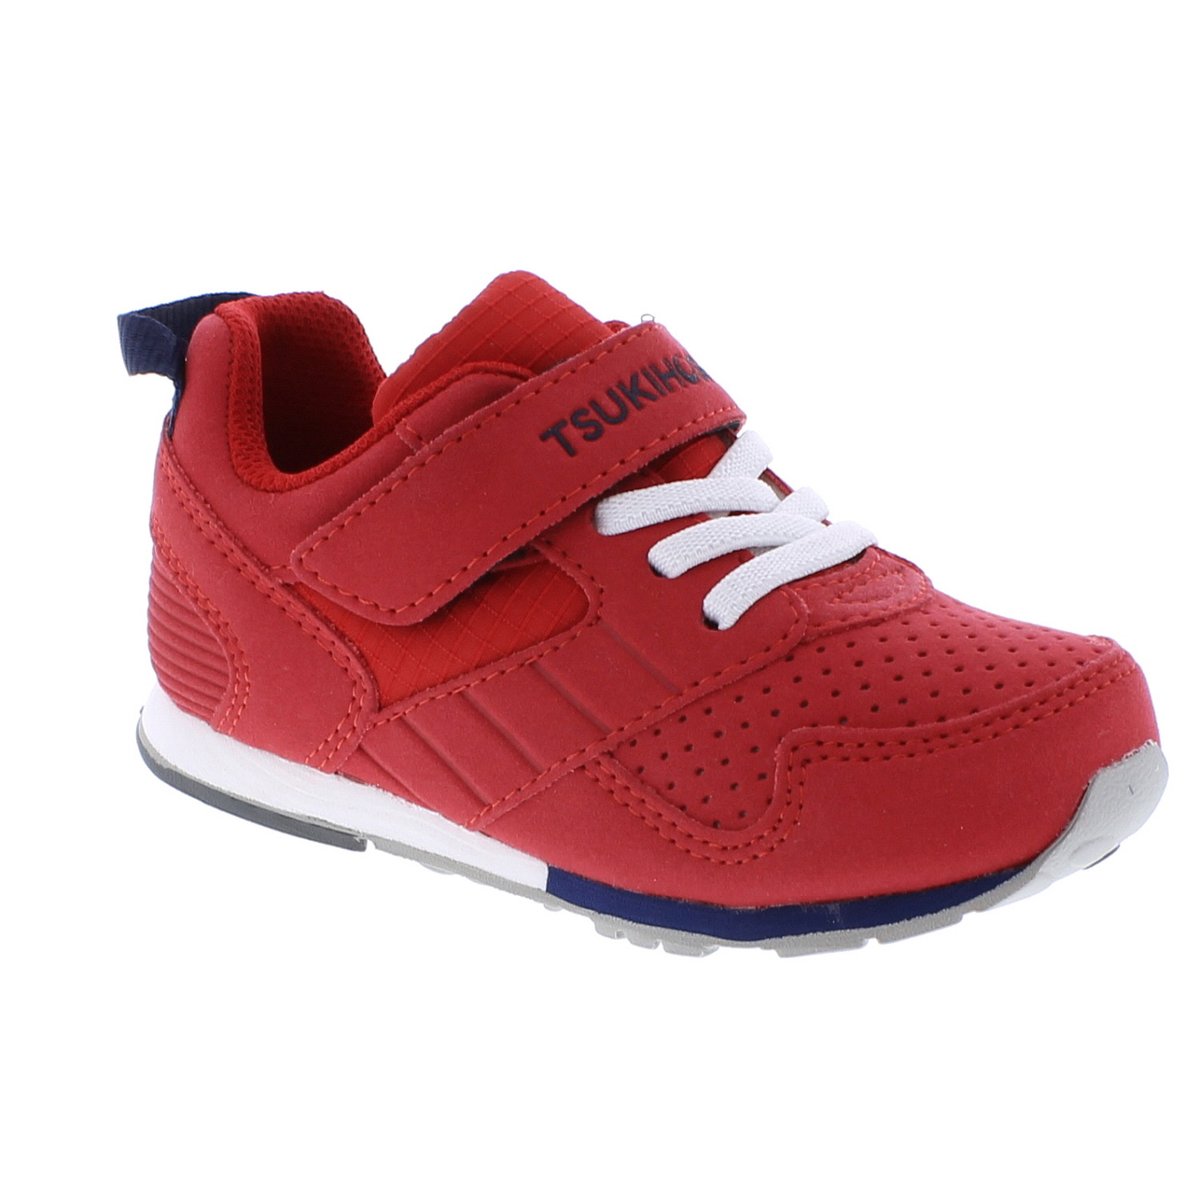 Childrens Tsukihoshi Racer Sneaker in Red/Navy from the front view